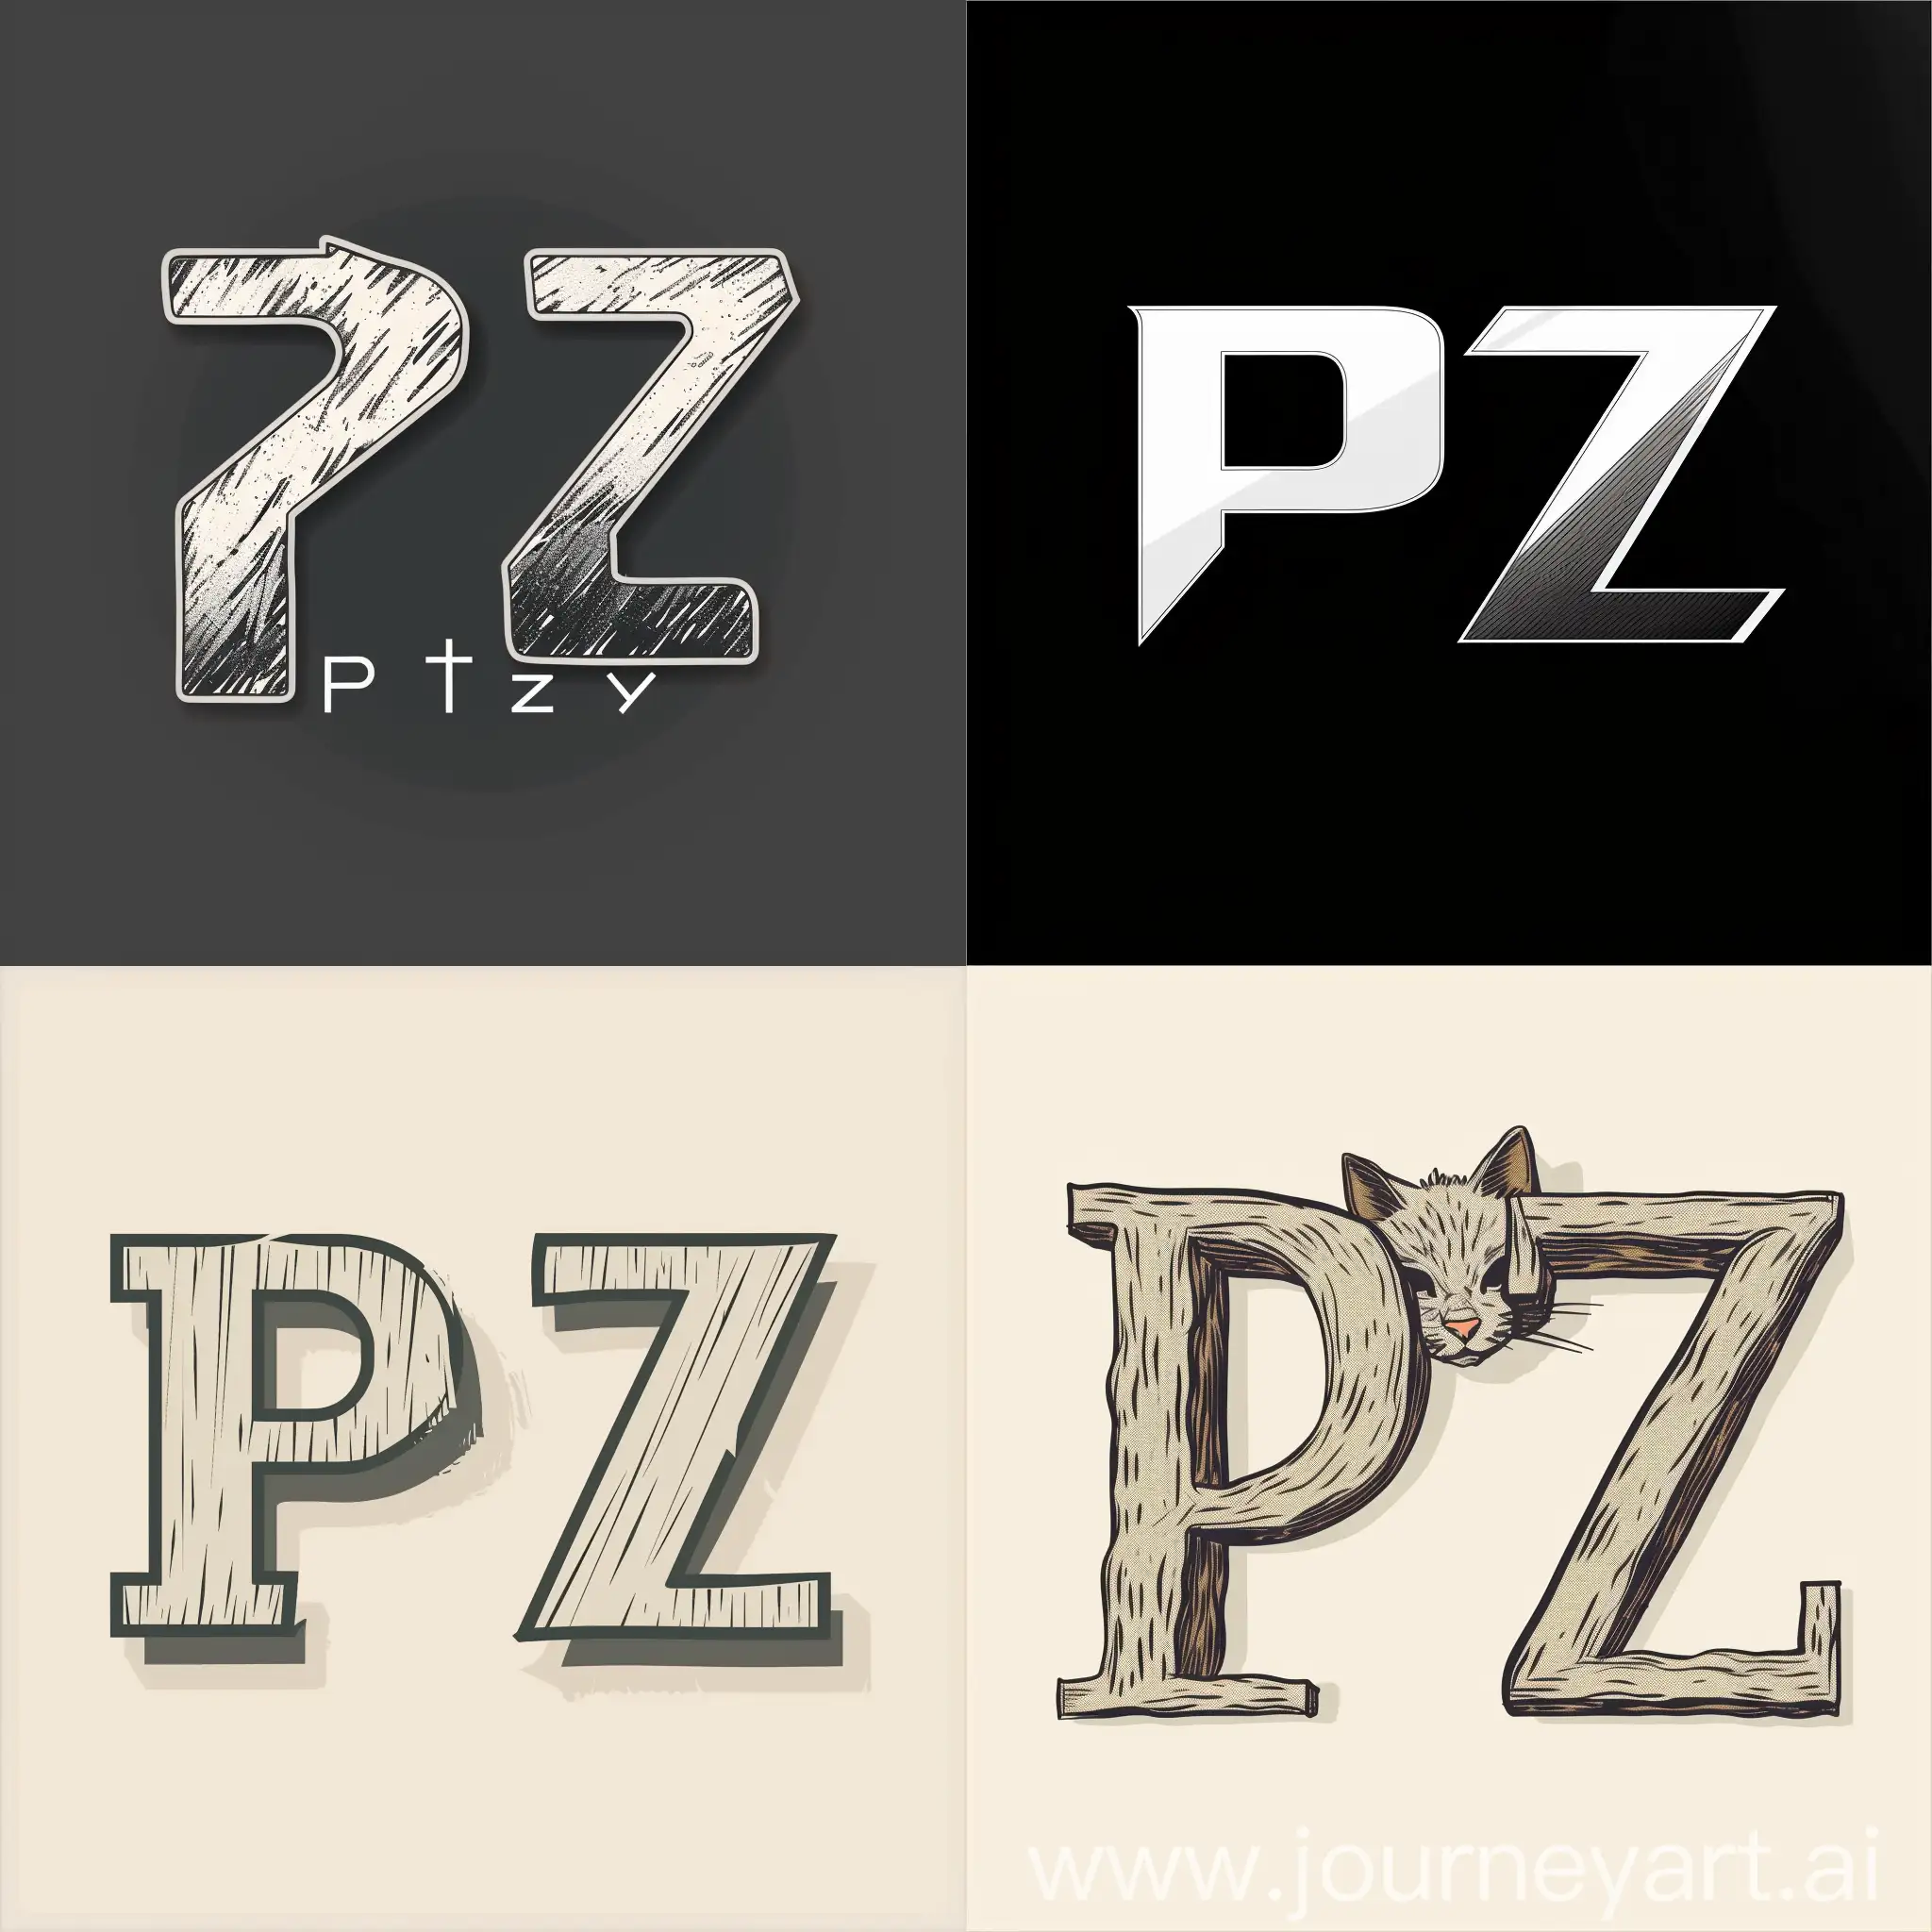 Minimalist-Petzy-Logo-Design-Featuring-Letters-P-and-Z